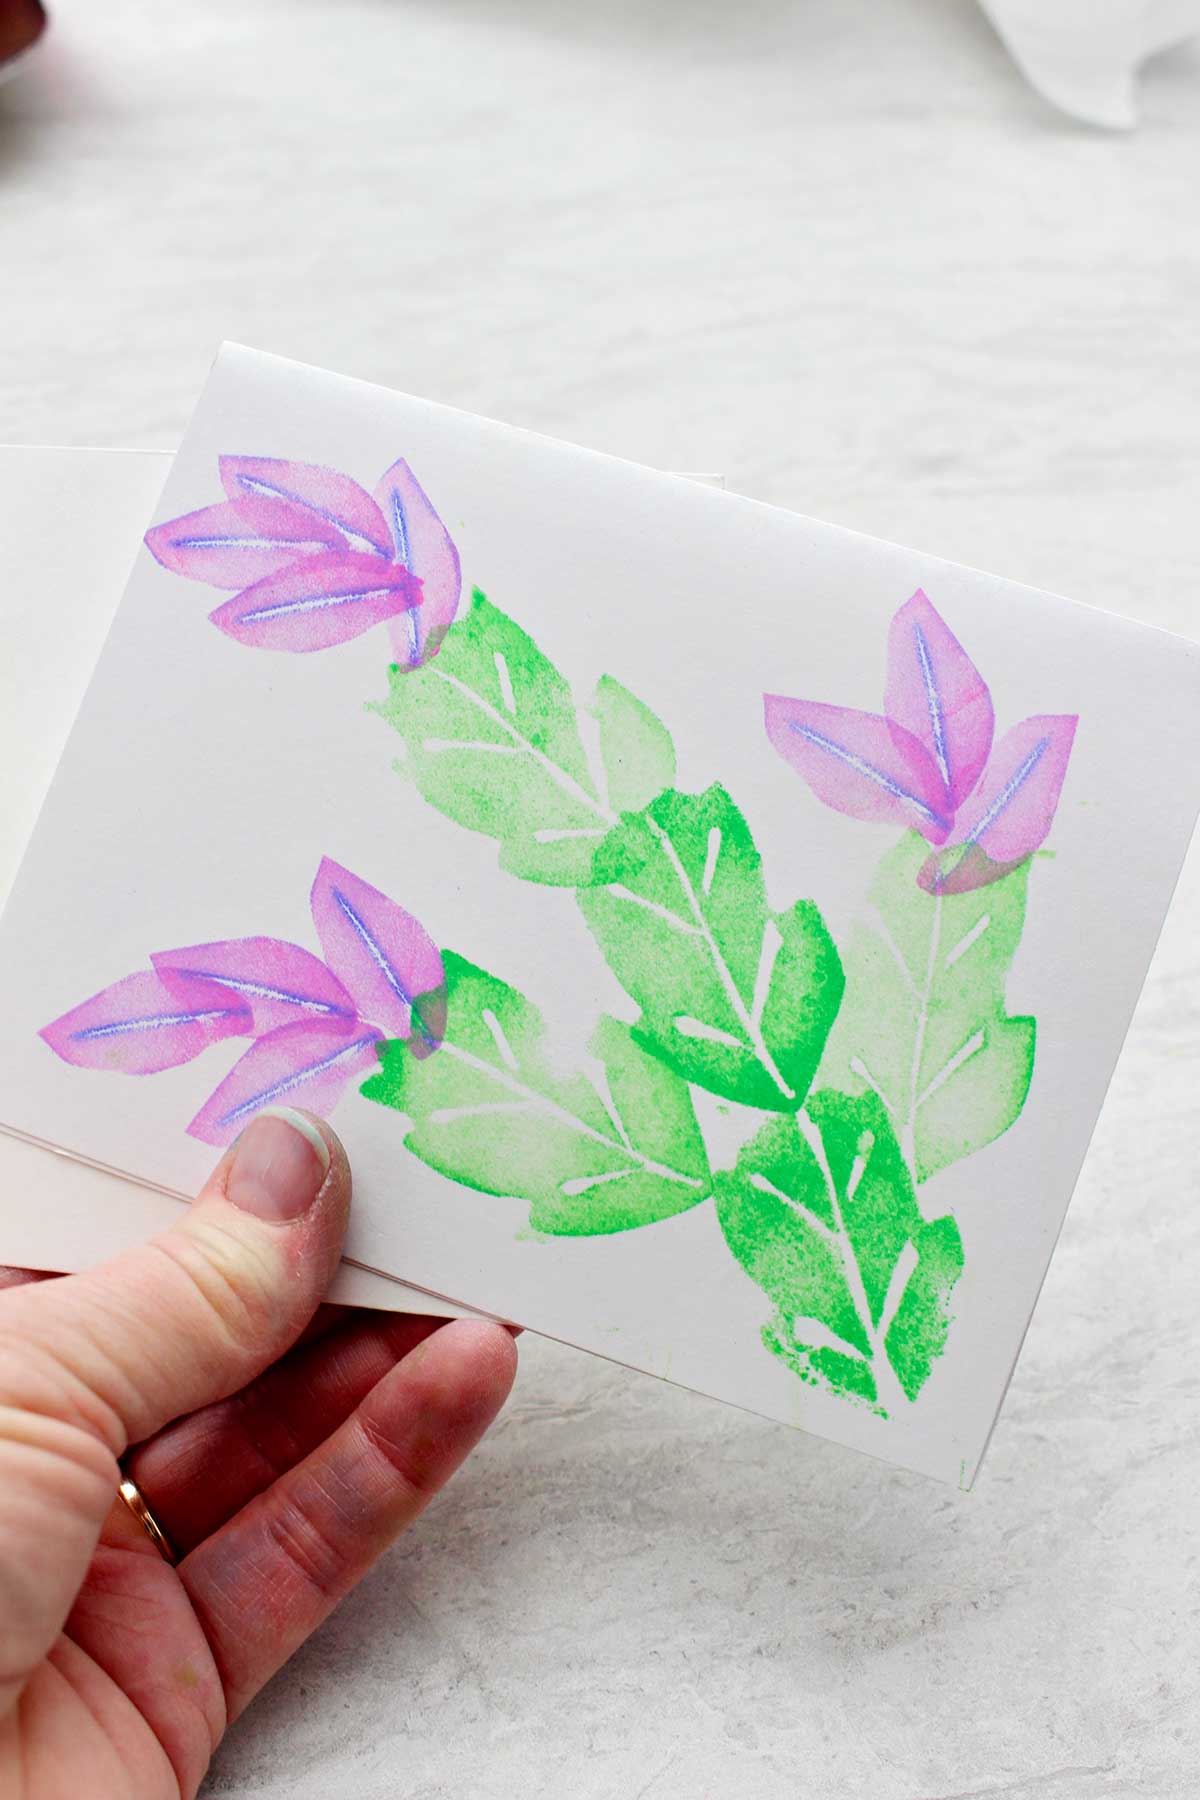 Hand holding print with leaves and purple flowers made from craft foam stamps.